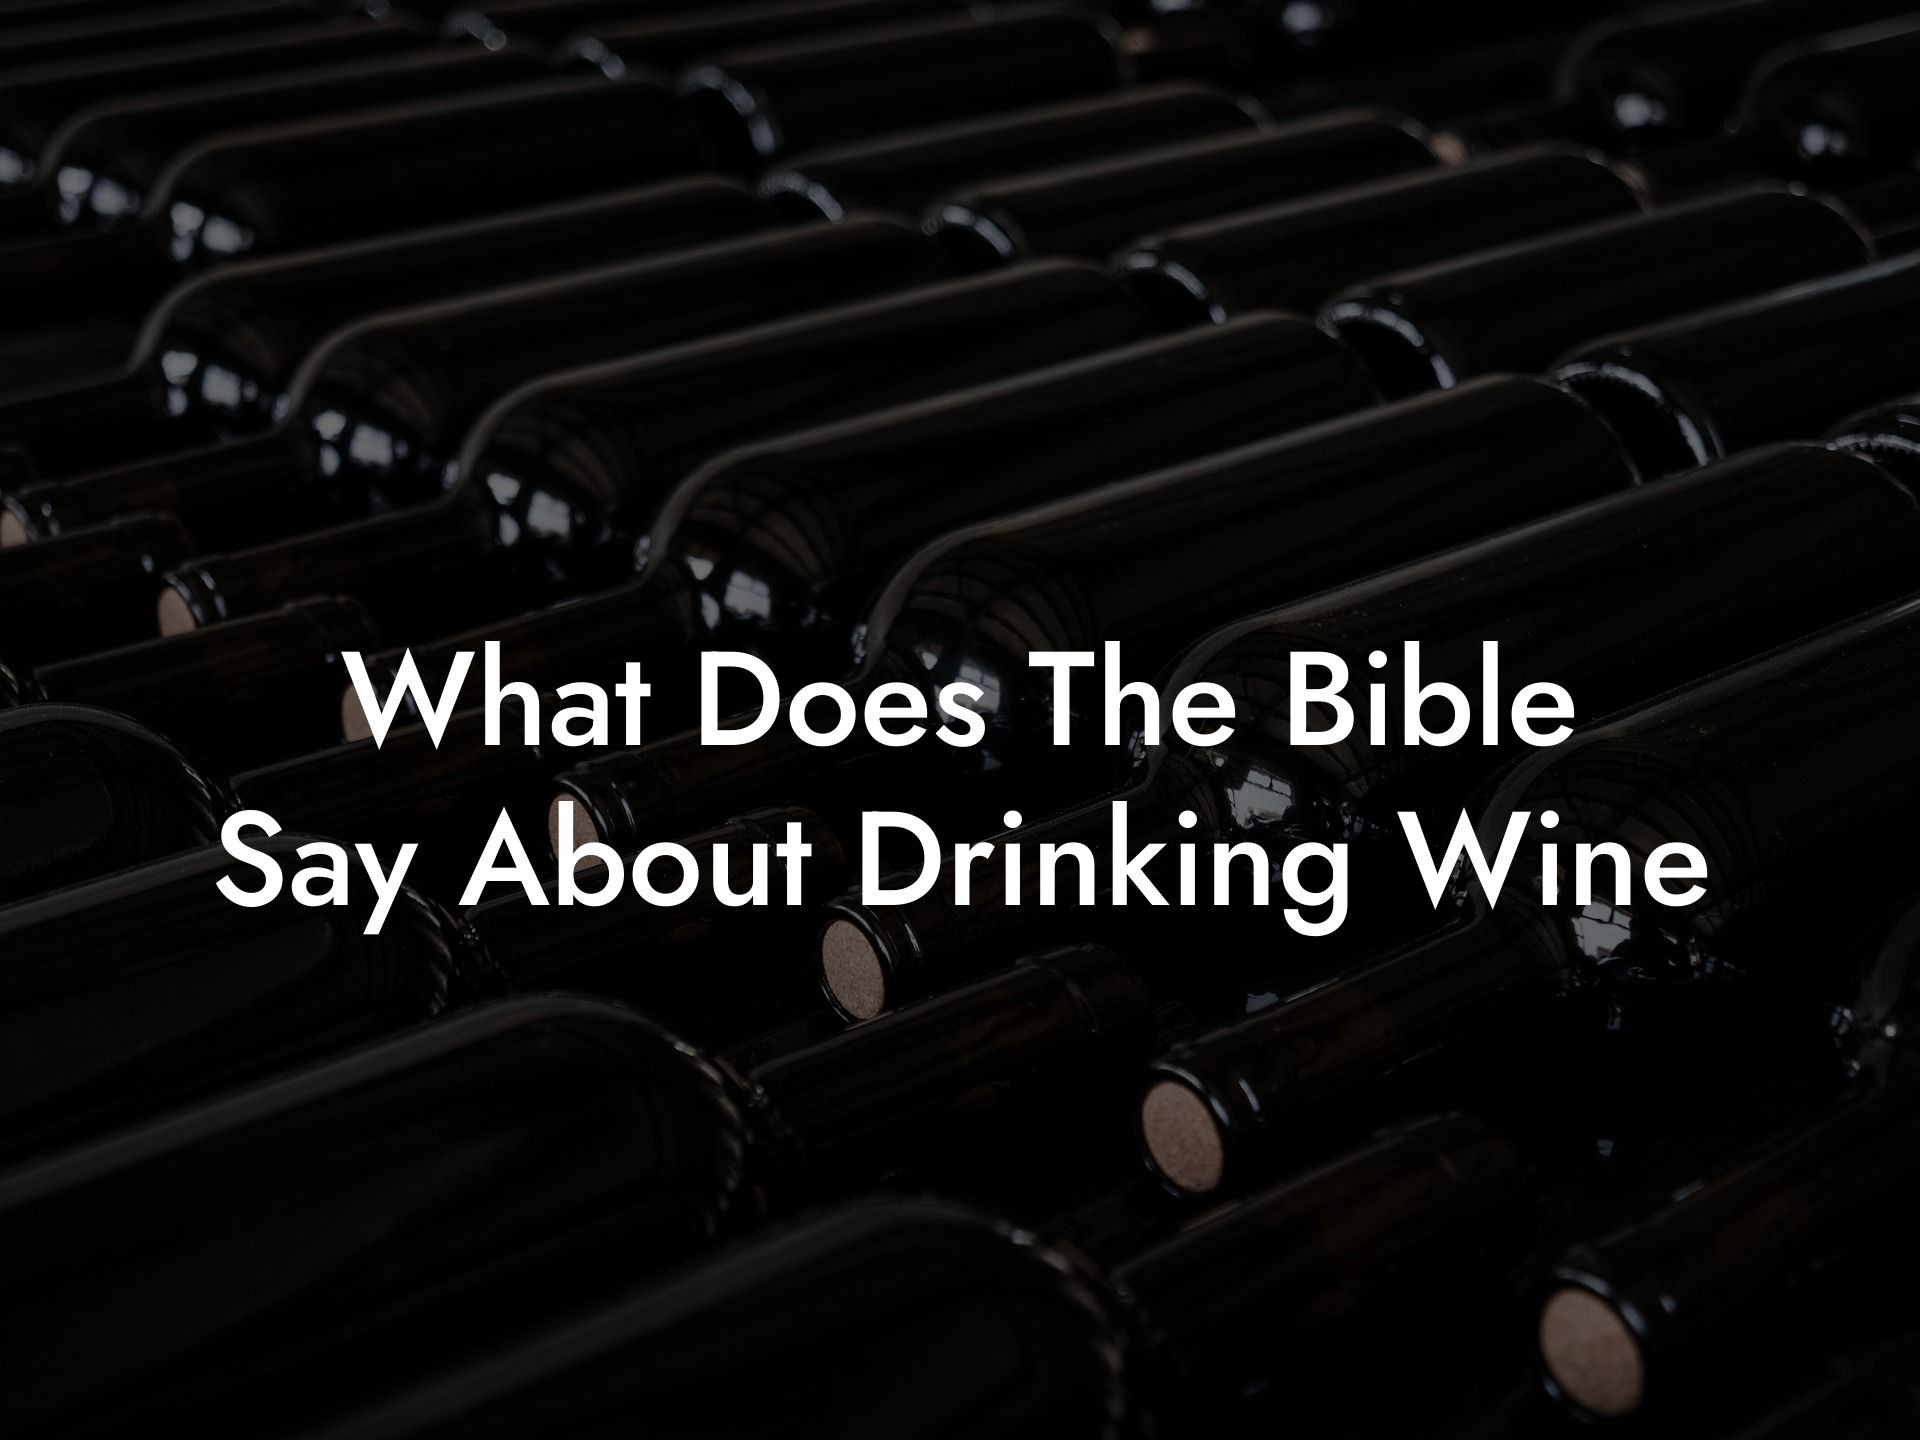 What Does The Bible Say About Drinking Wine